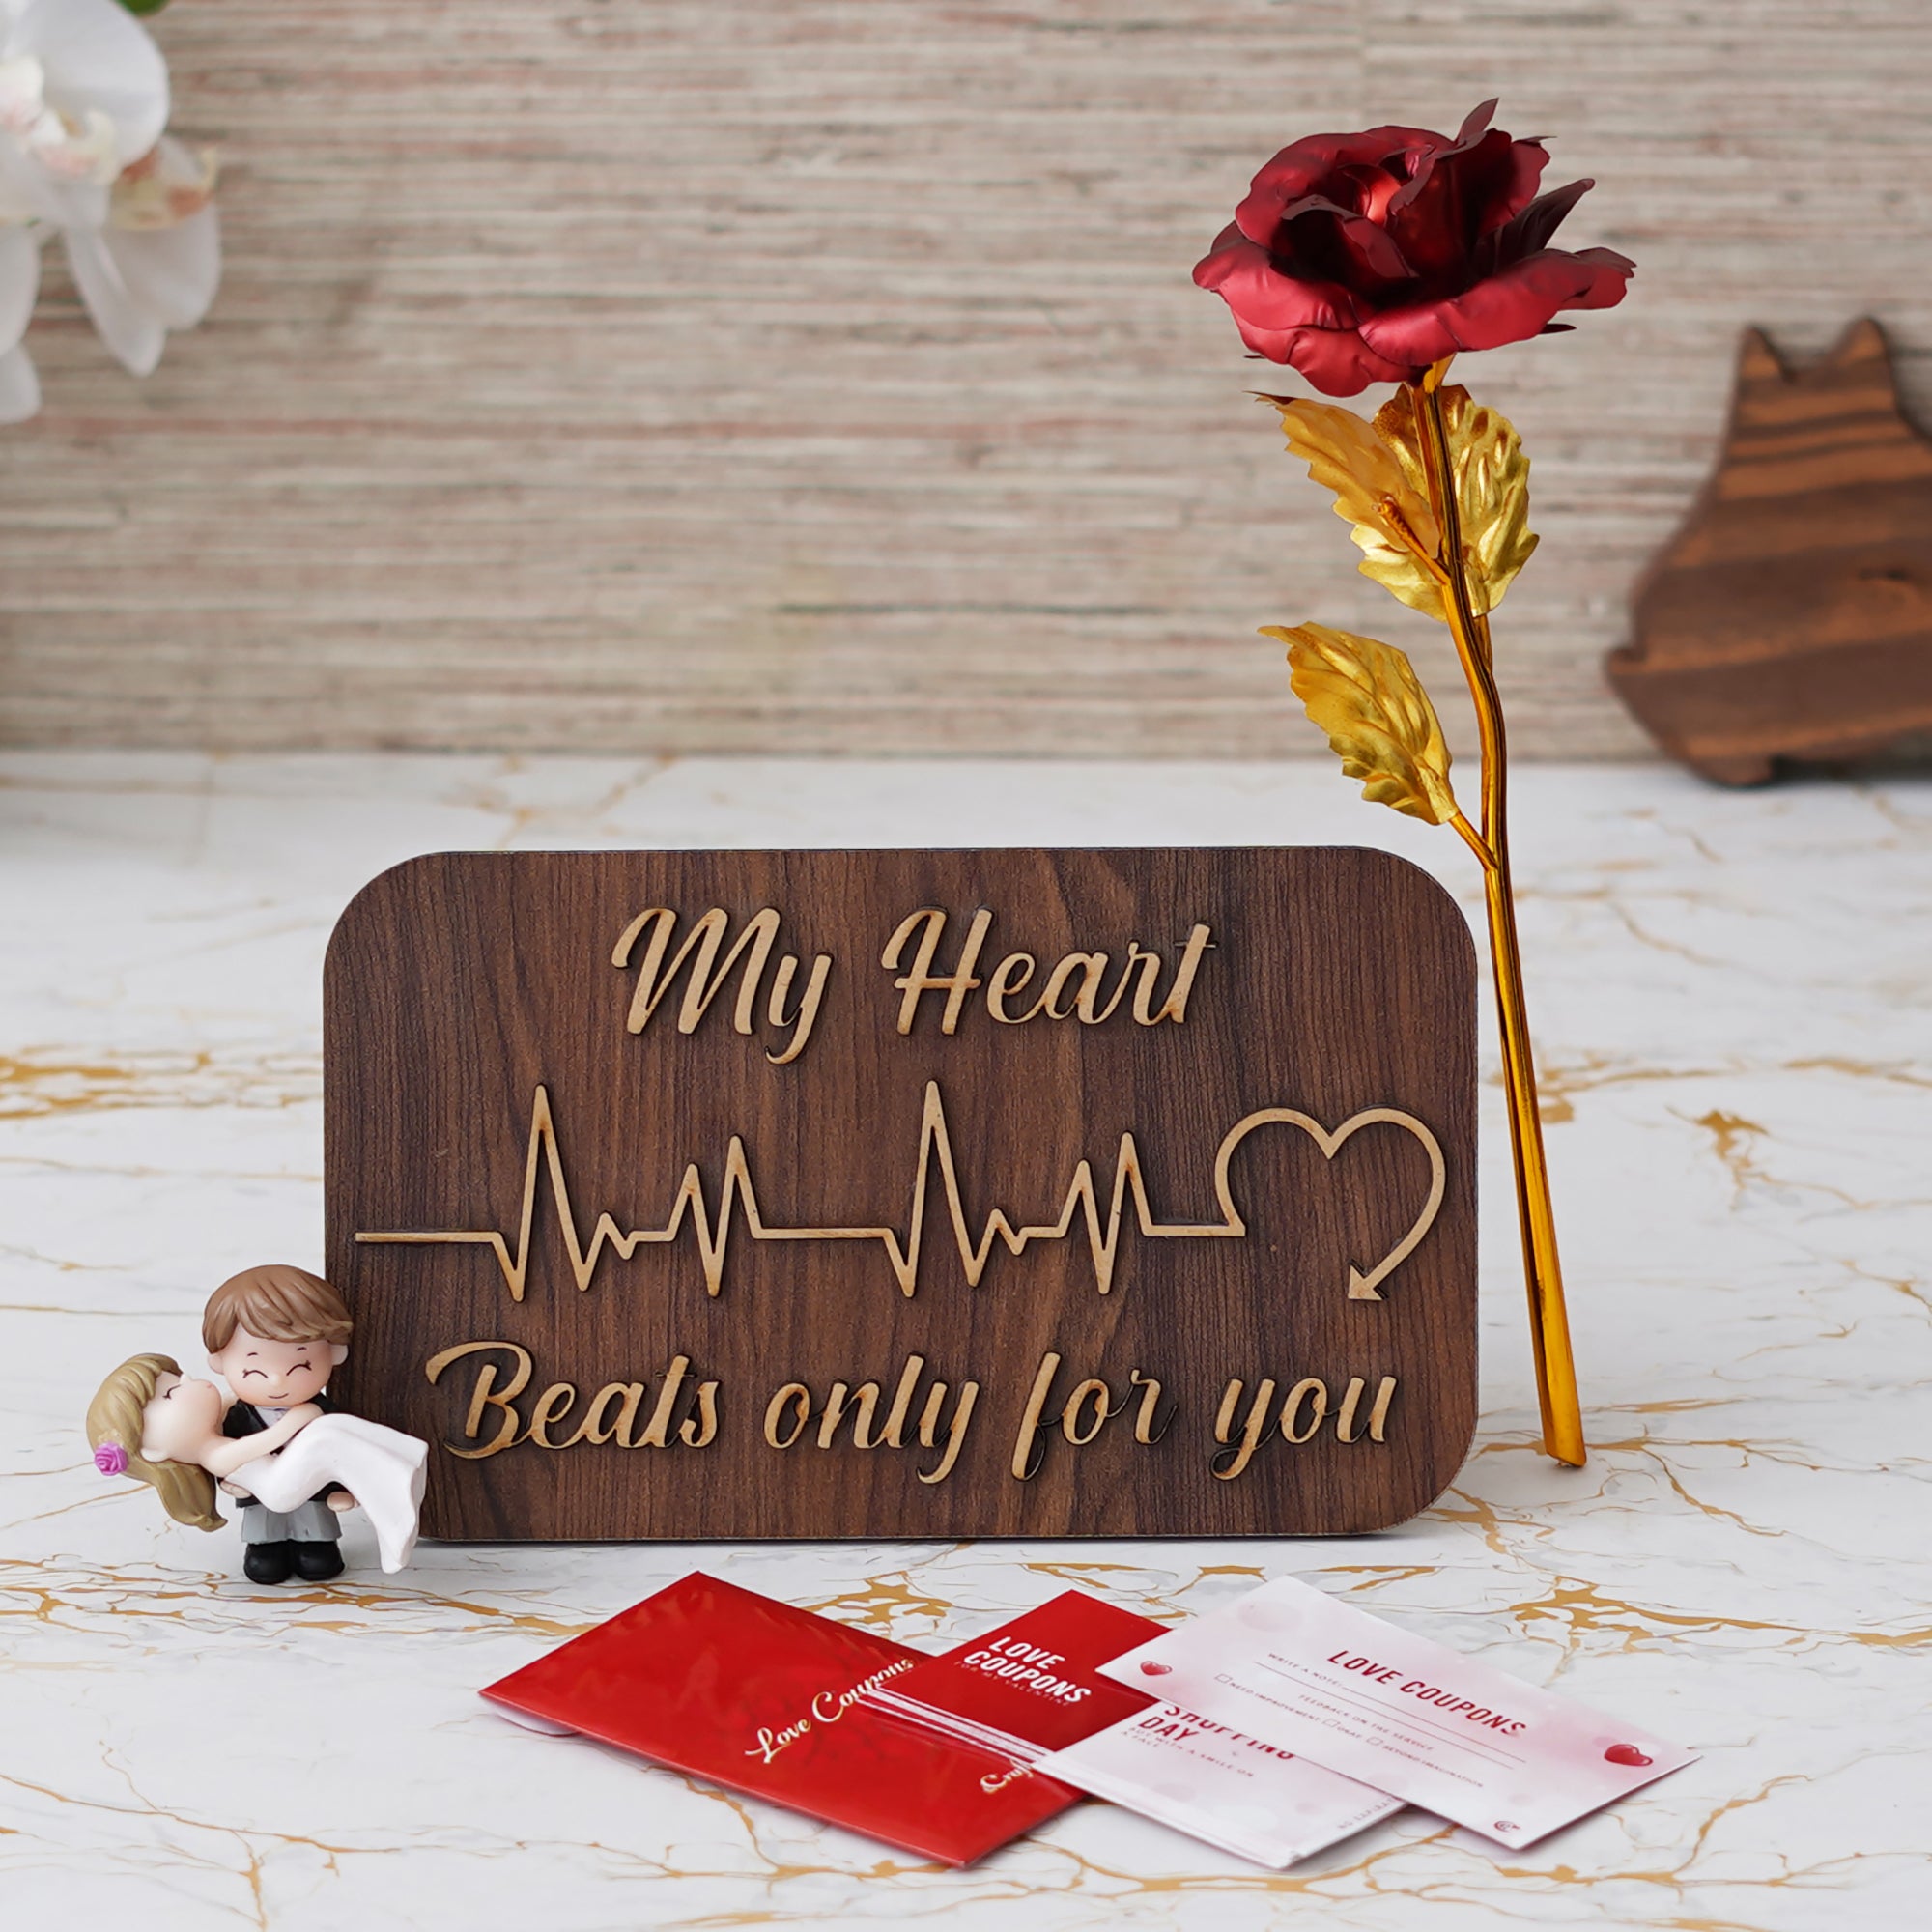 Valentine Combo of Pack of 12 Love Coupons Gift Cards Set, Golden Red Rose Gift Set, "My Heart Beats Only For You" Wooden Showpiece With Stand, Bride Kissing Groom Romantic Polyresin Decorative Showpiece